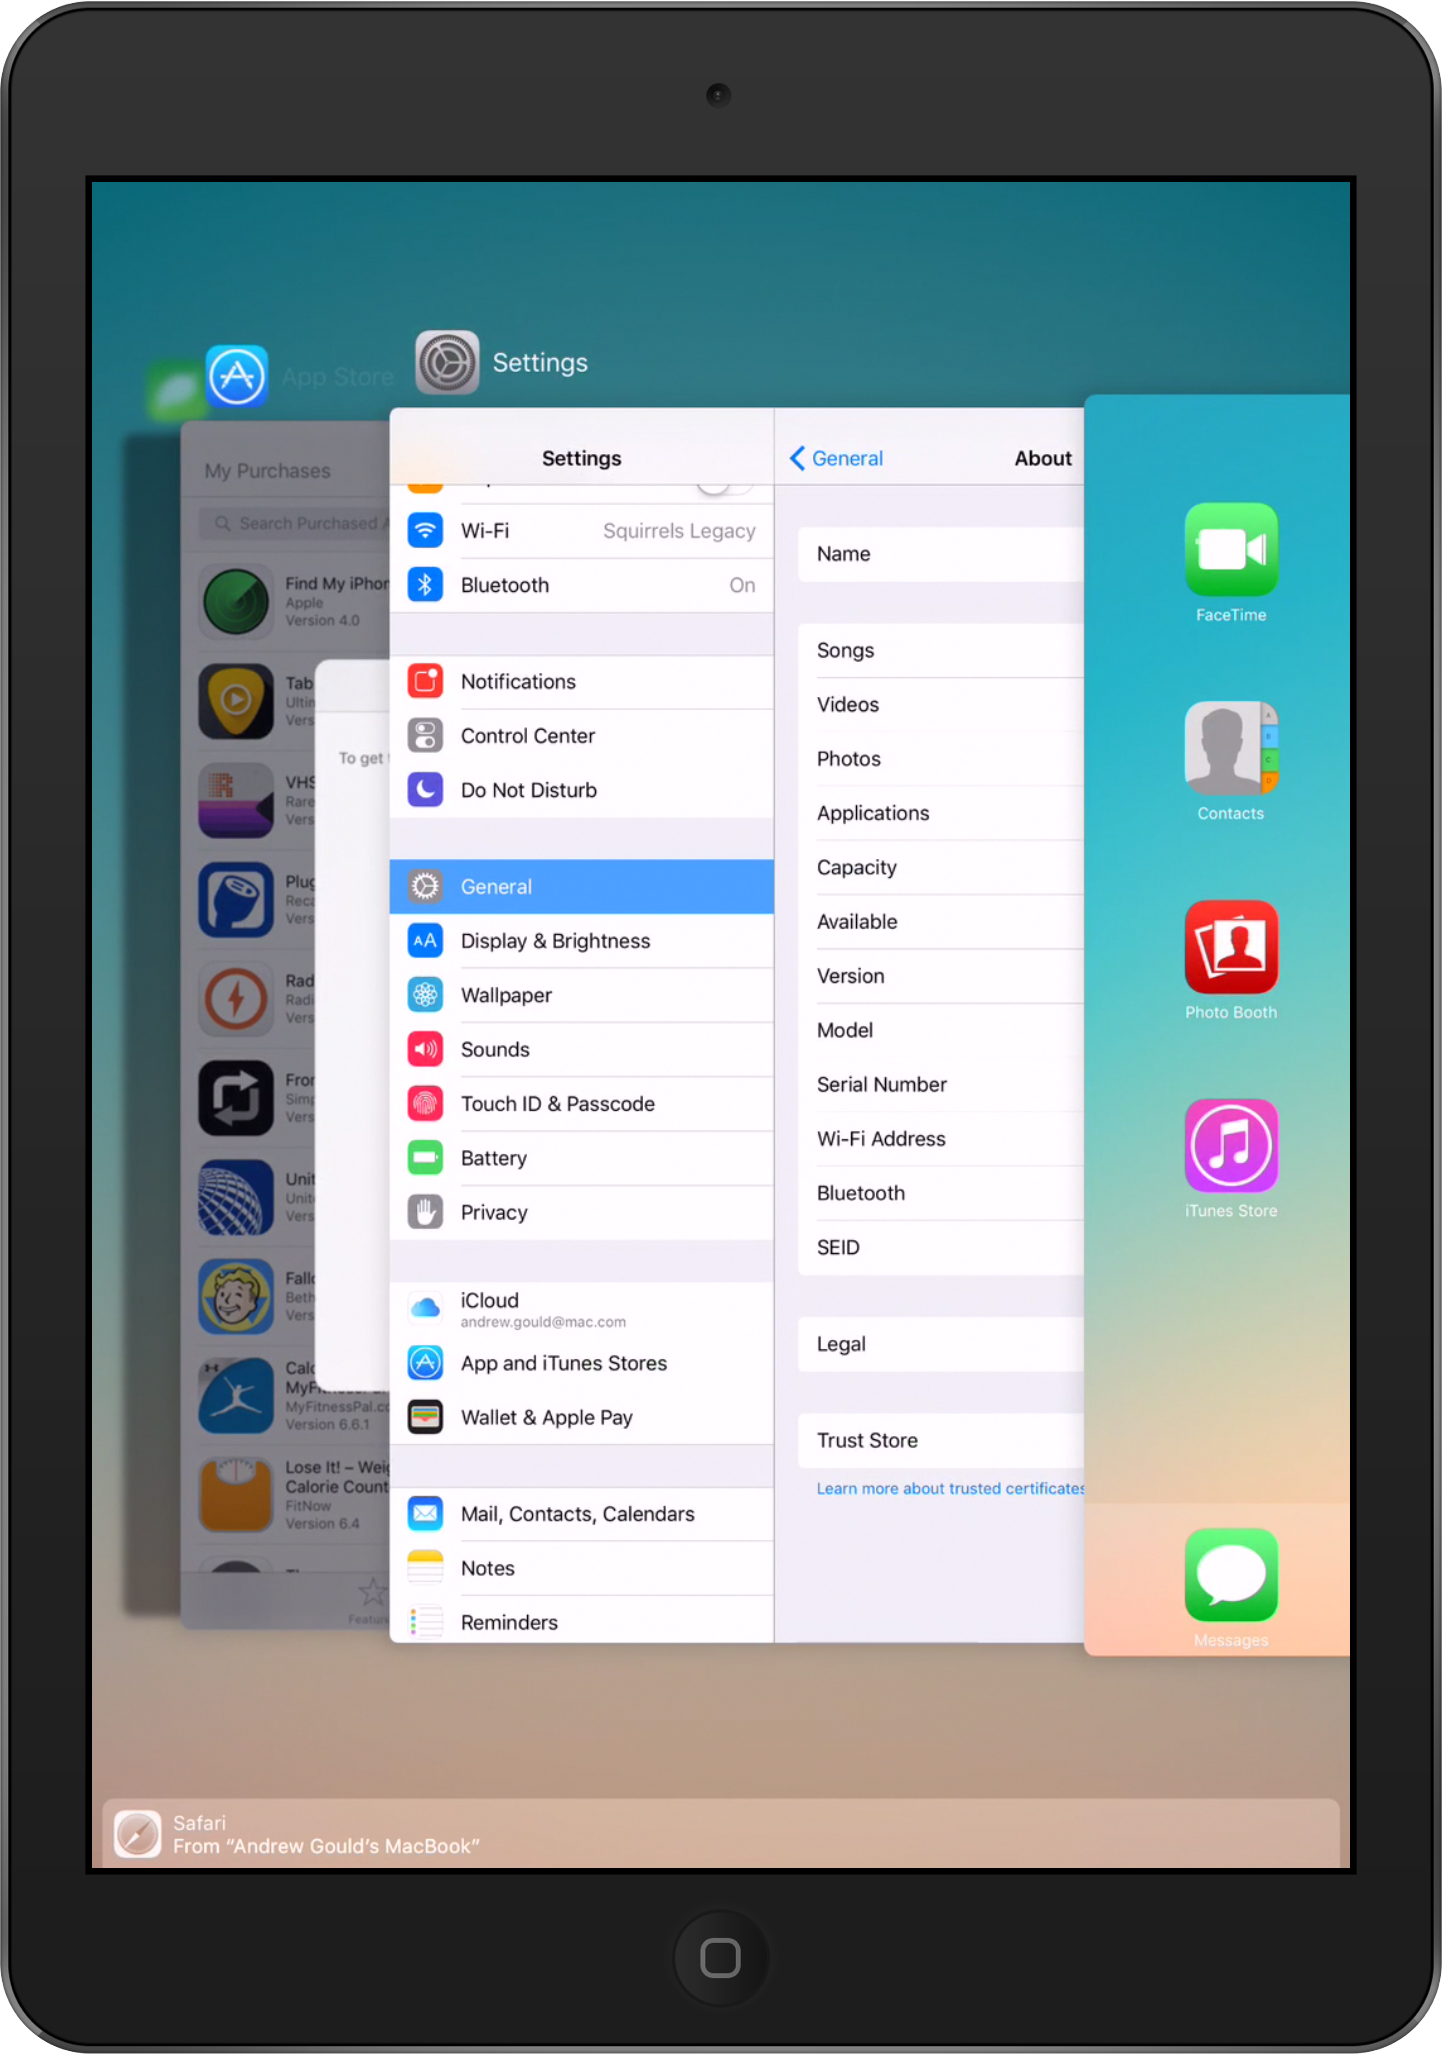 How To Mirror Ios 9 Your Computer, How To Enable Screen Mirroring On Ipad